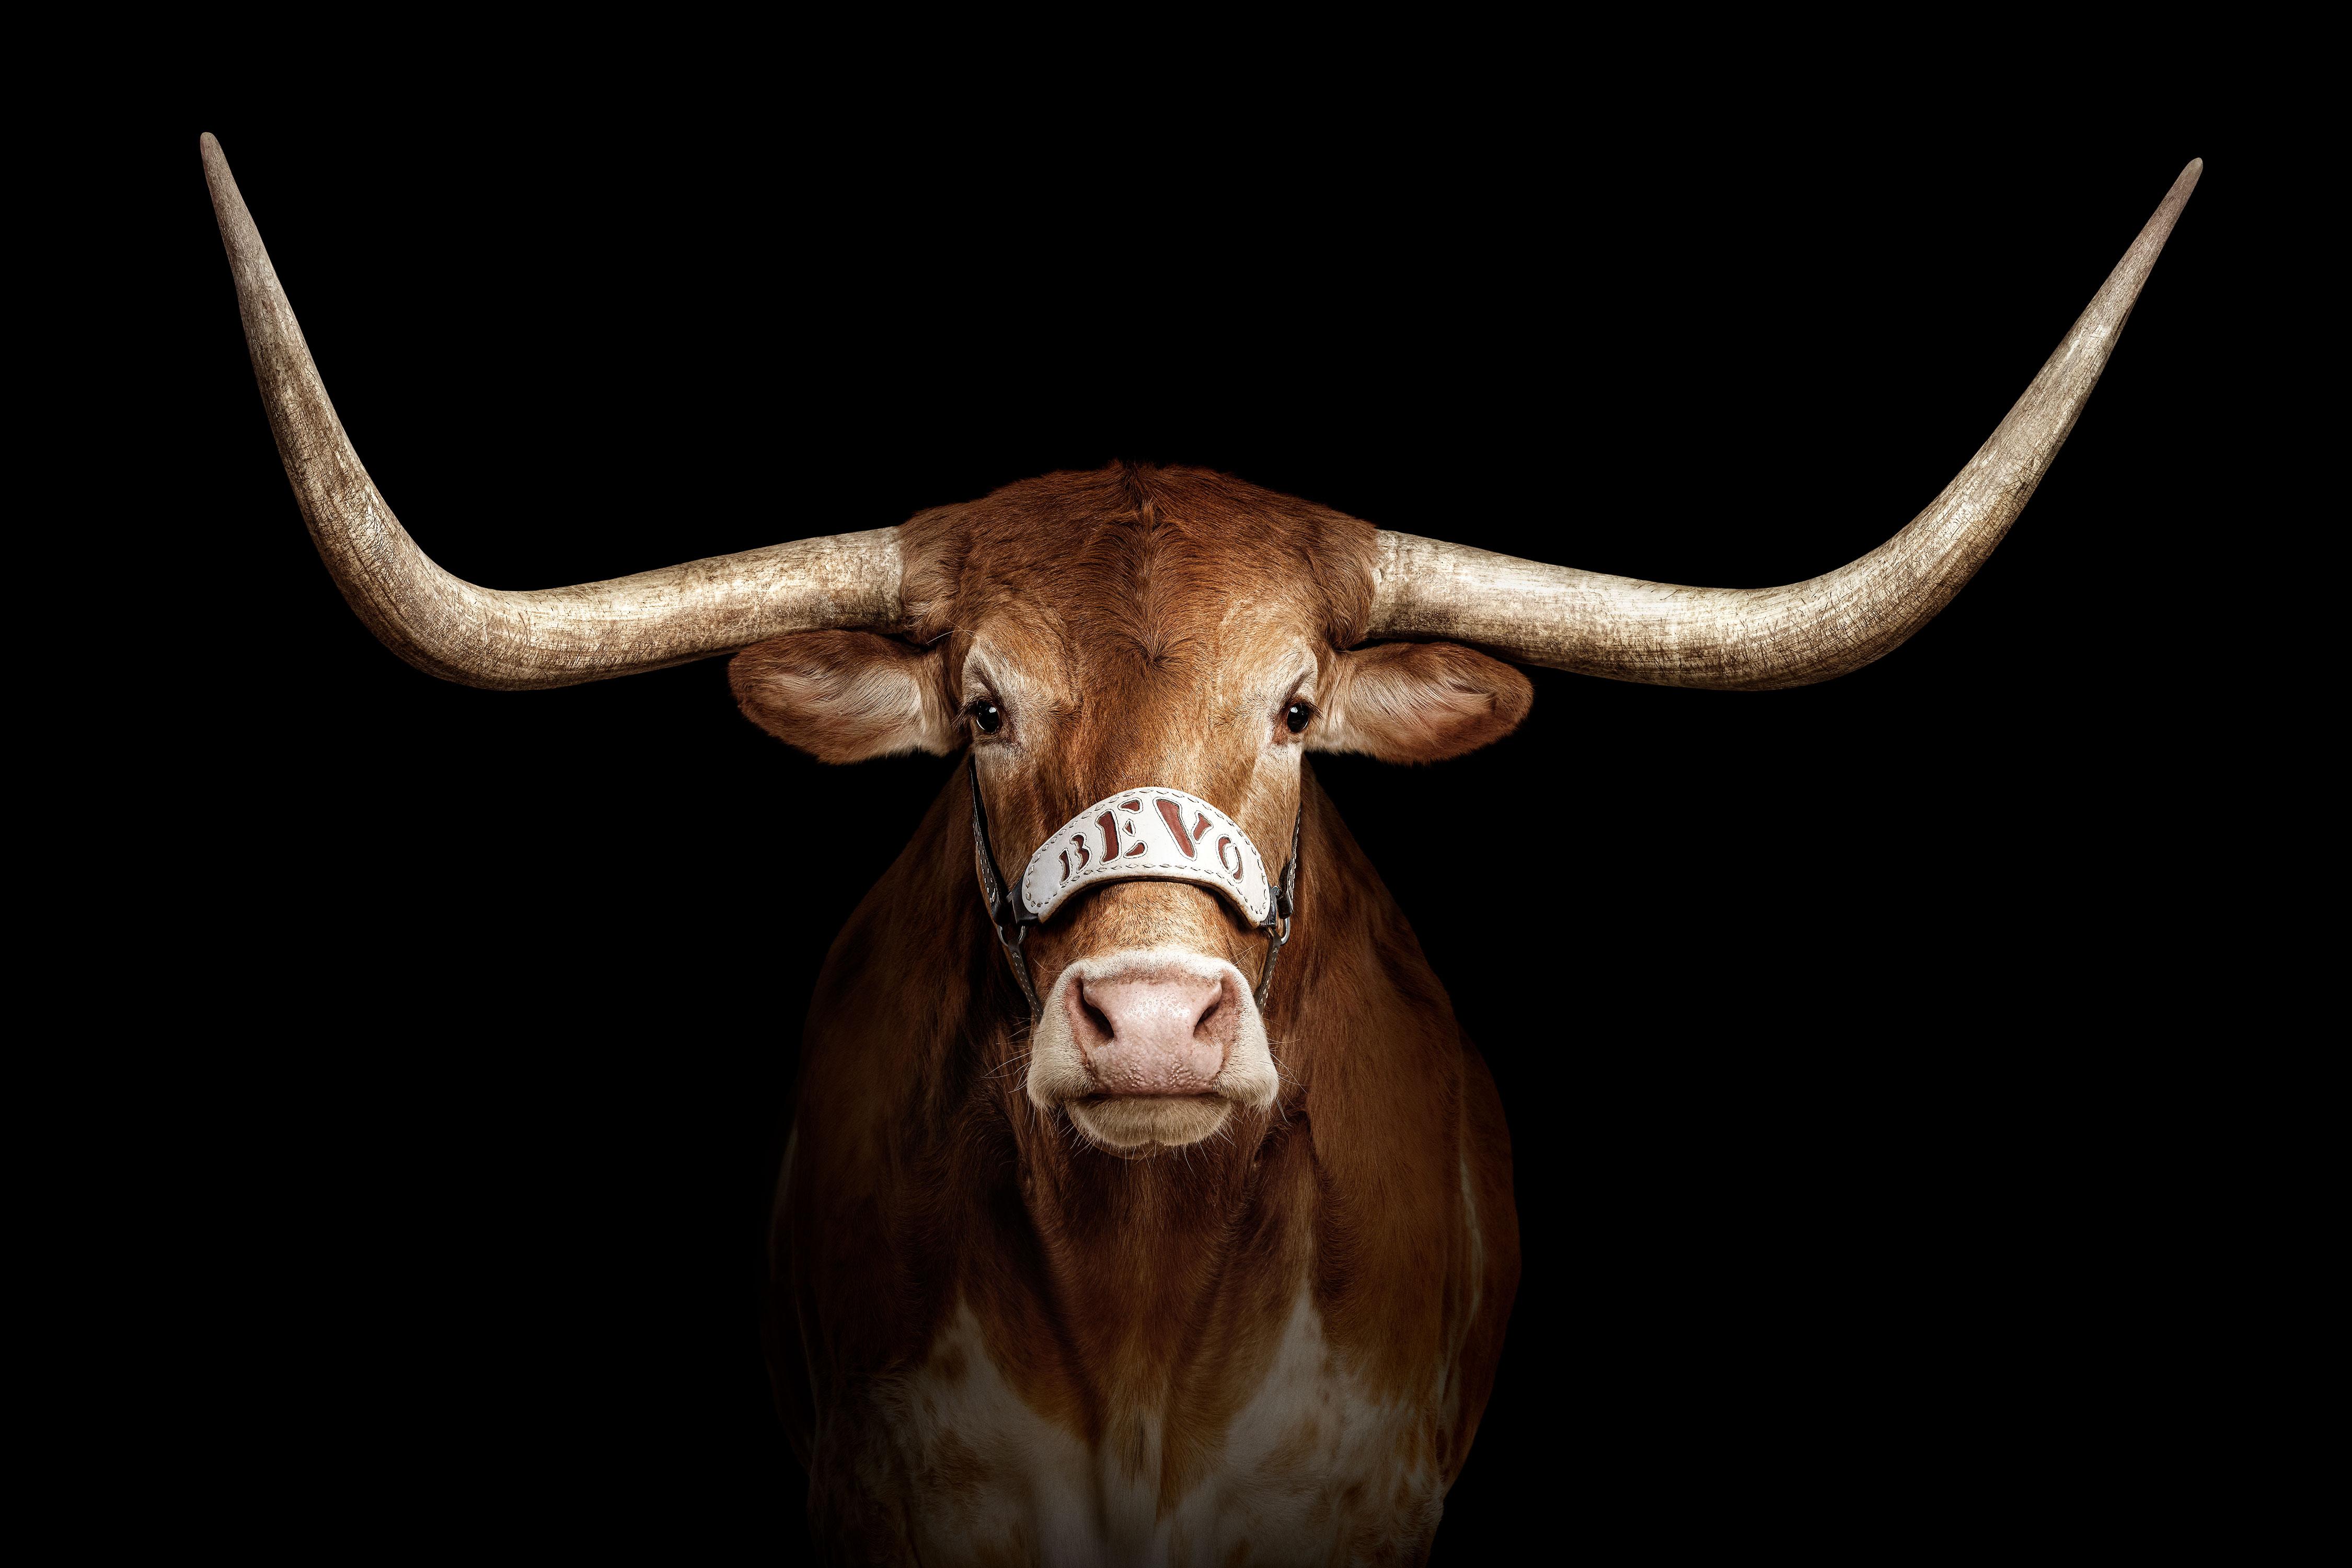 "What an honor it was to photograph the University of Texas mascot, Bevo XV, when he was a short-horned calf in 2016. At that time, I thought how great it would be if I had the opportunity to come back and photograph him after his horns grew into